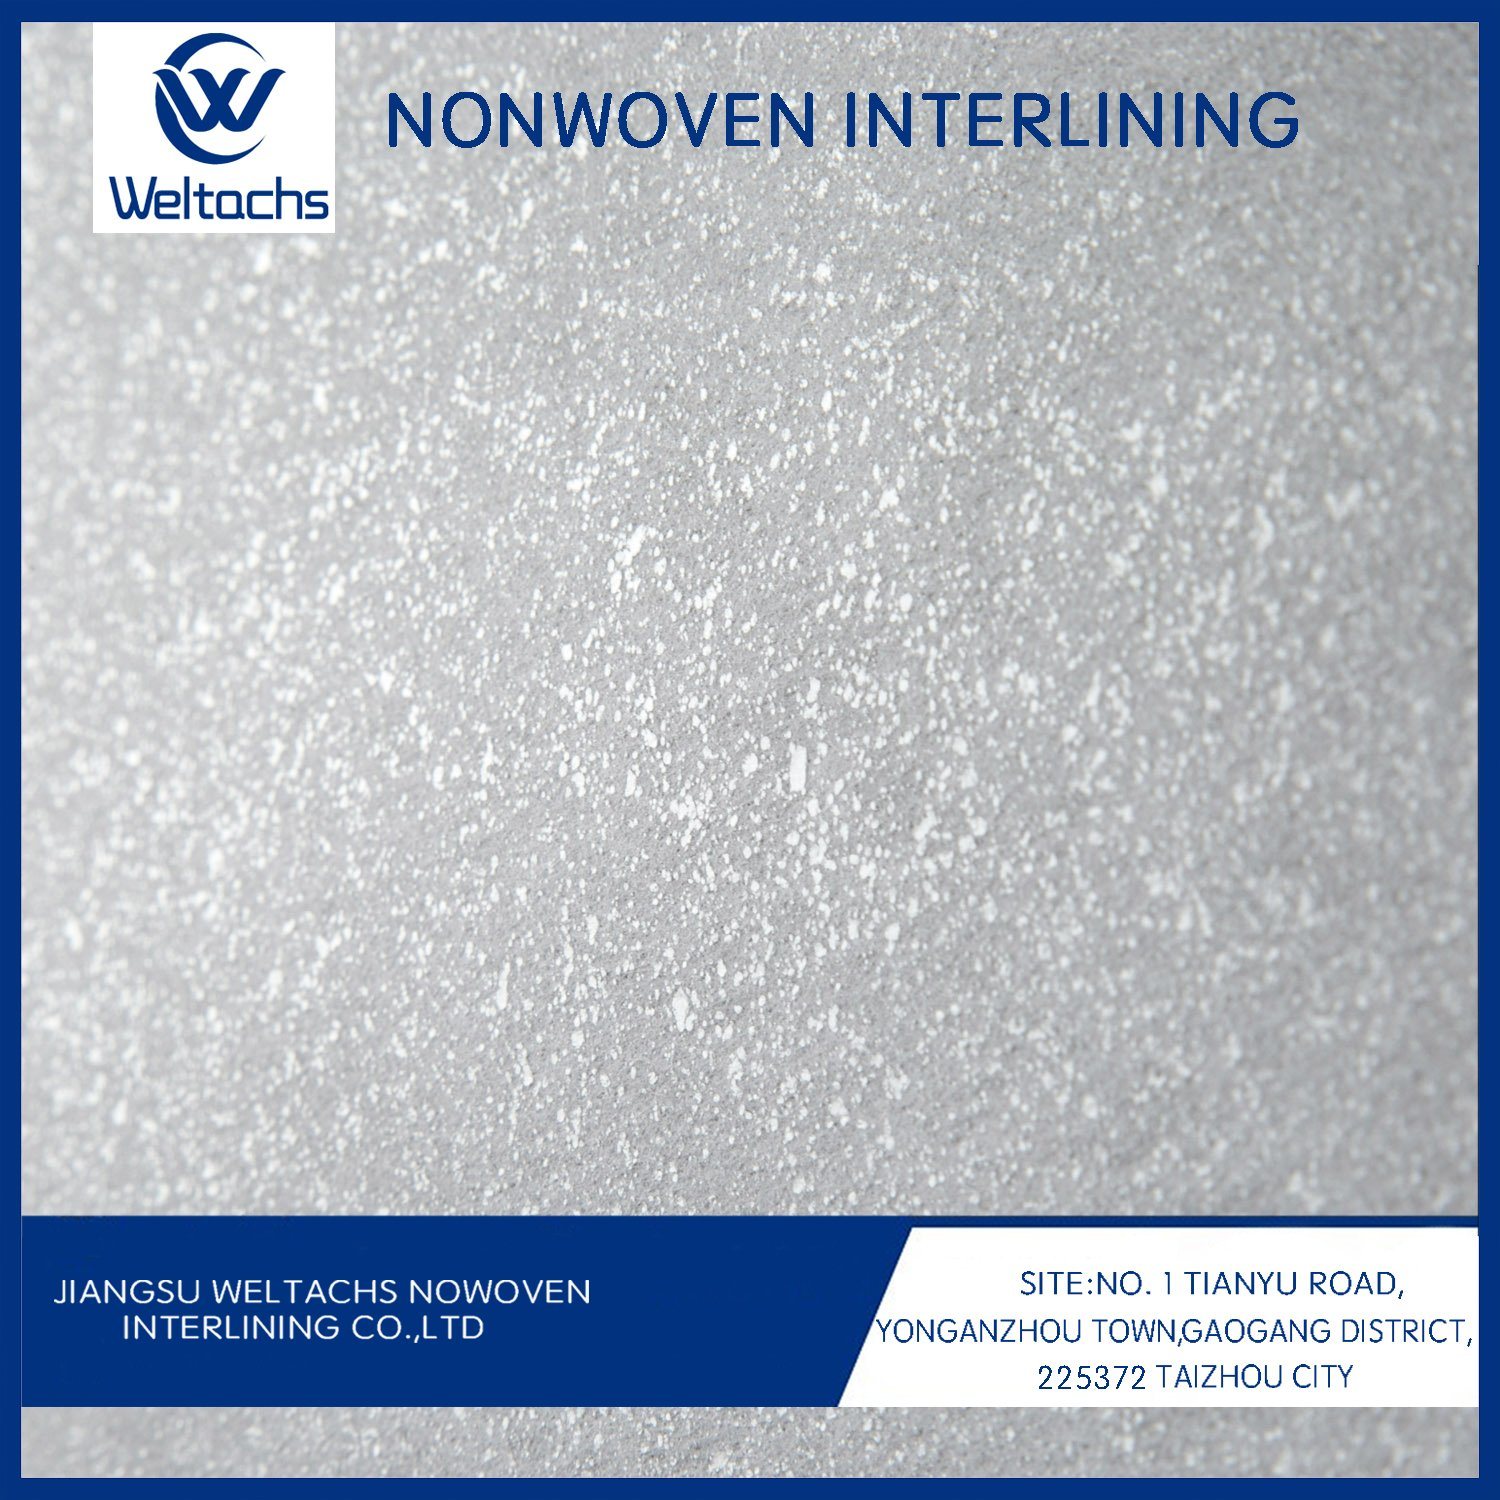 Made in China Chemical Bond Cut Away 100% Polyester Gum Stay 1025hf Non Woven Fusible Interlining